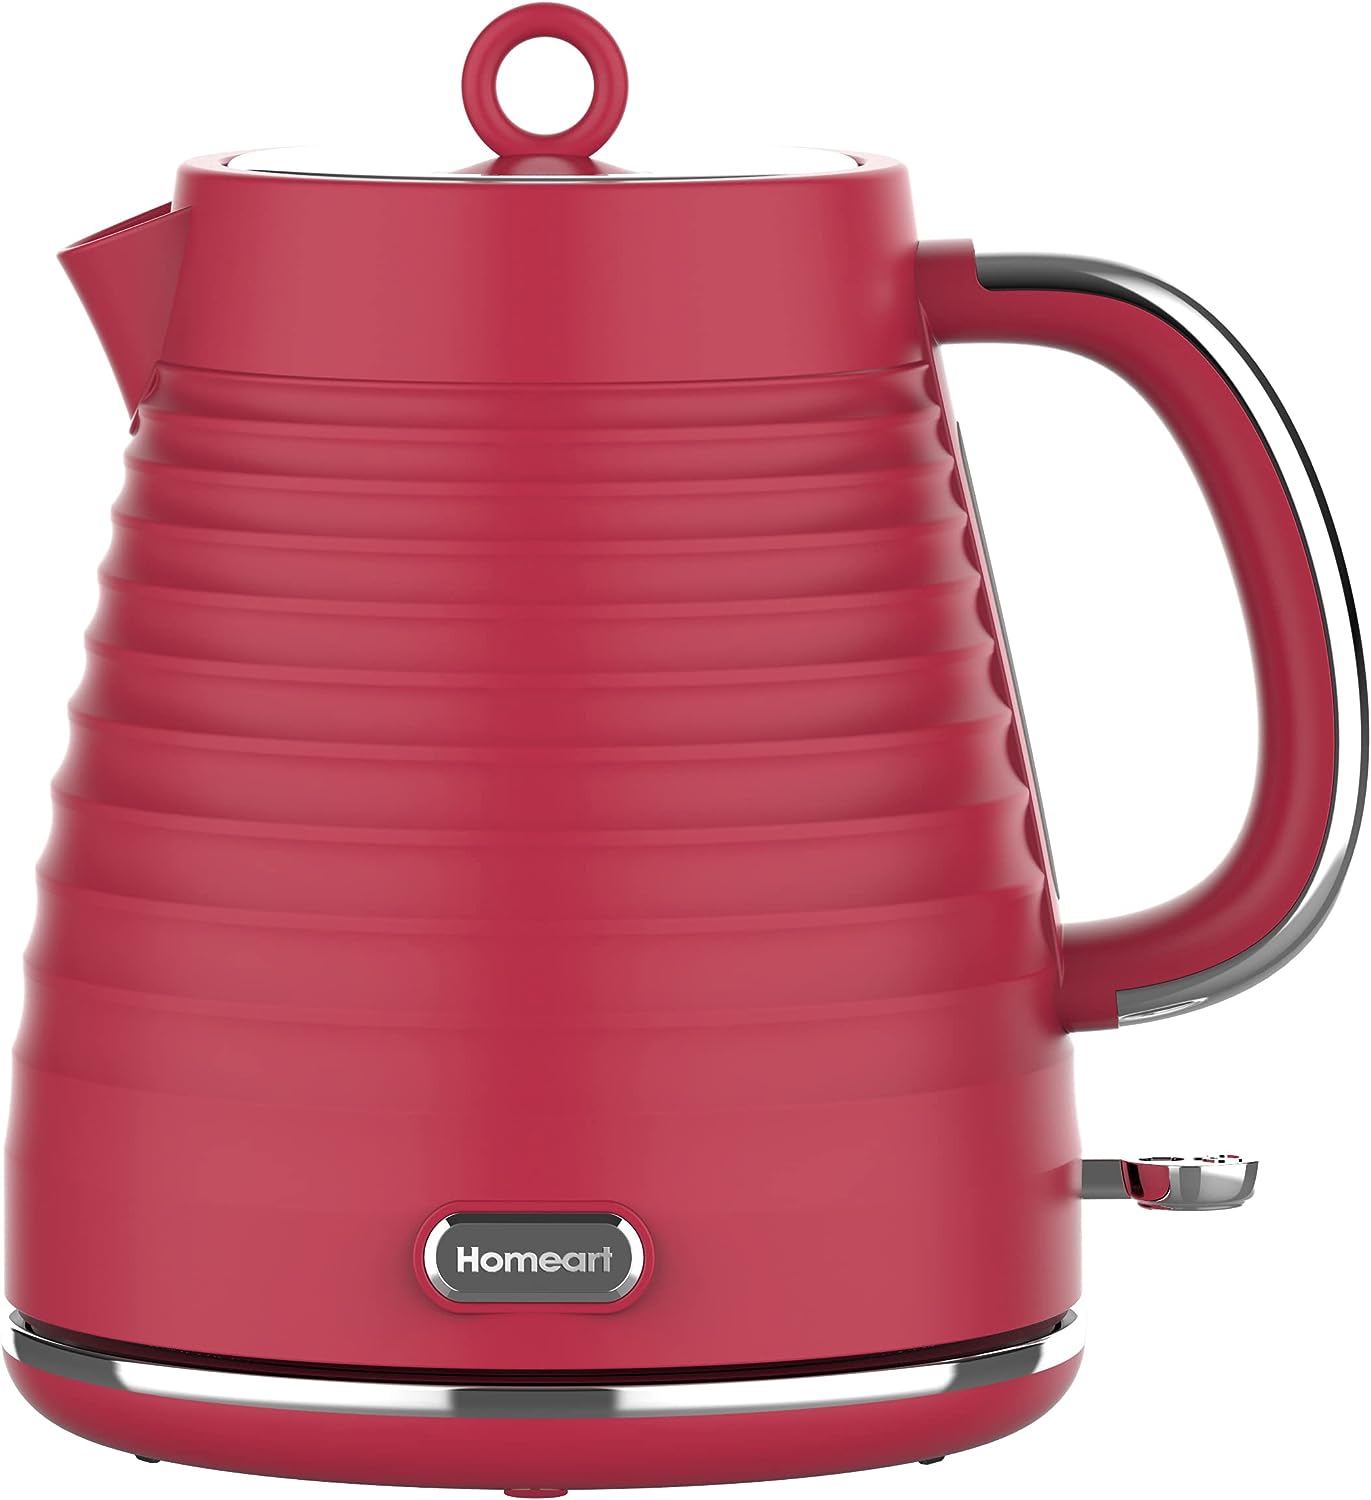 Homeart Riva 1.7L Electric Kettle with Removable Limescale Filter, Red